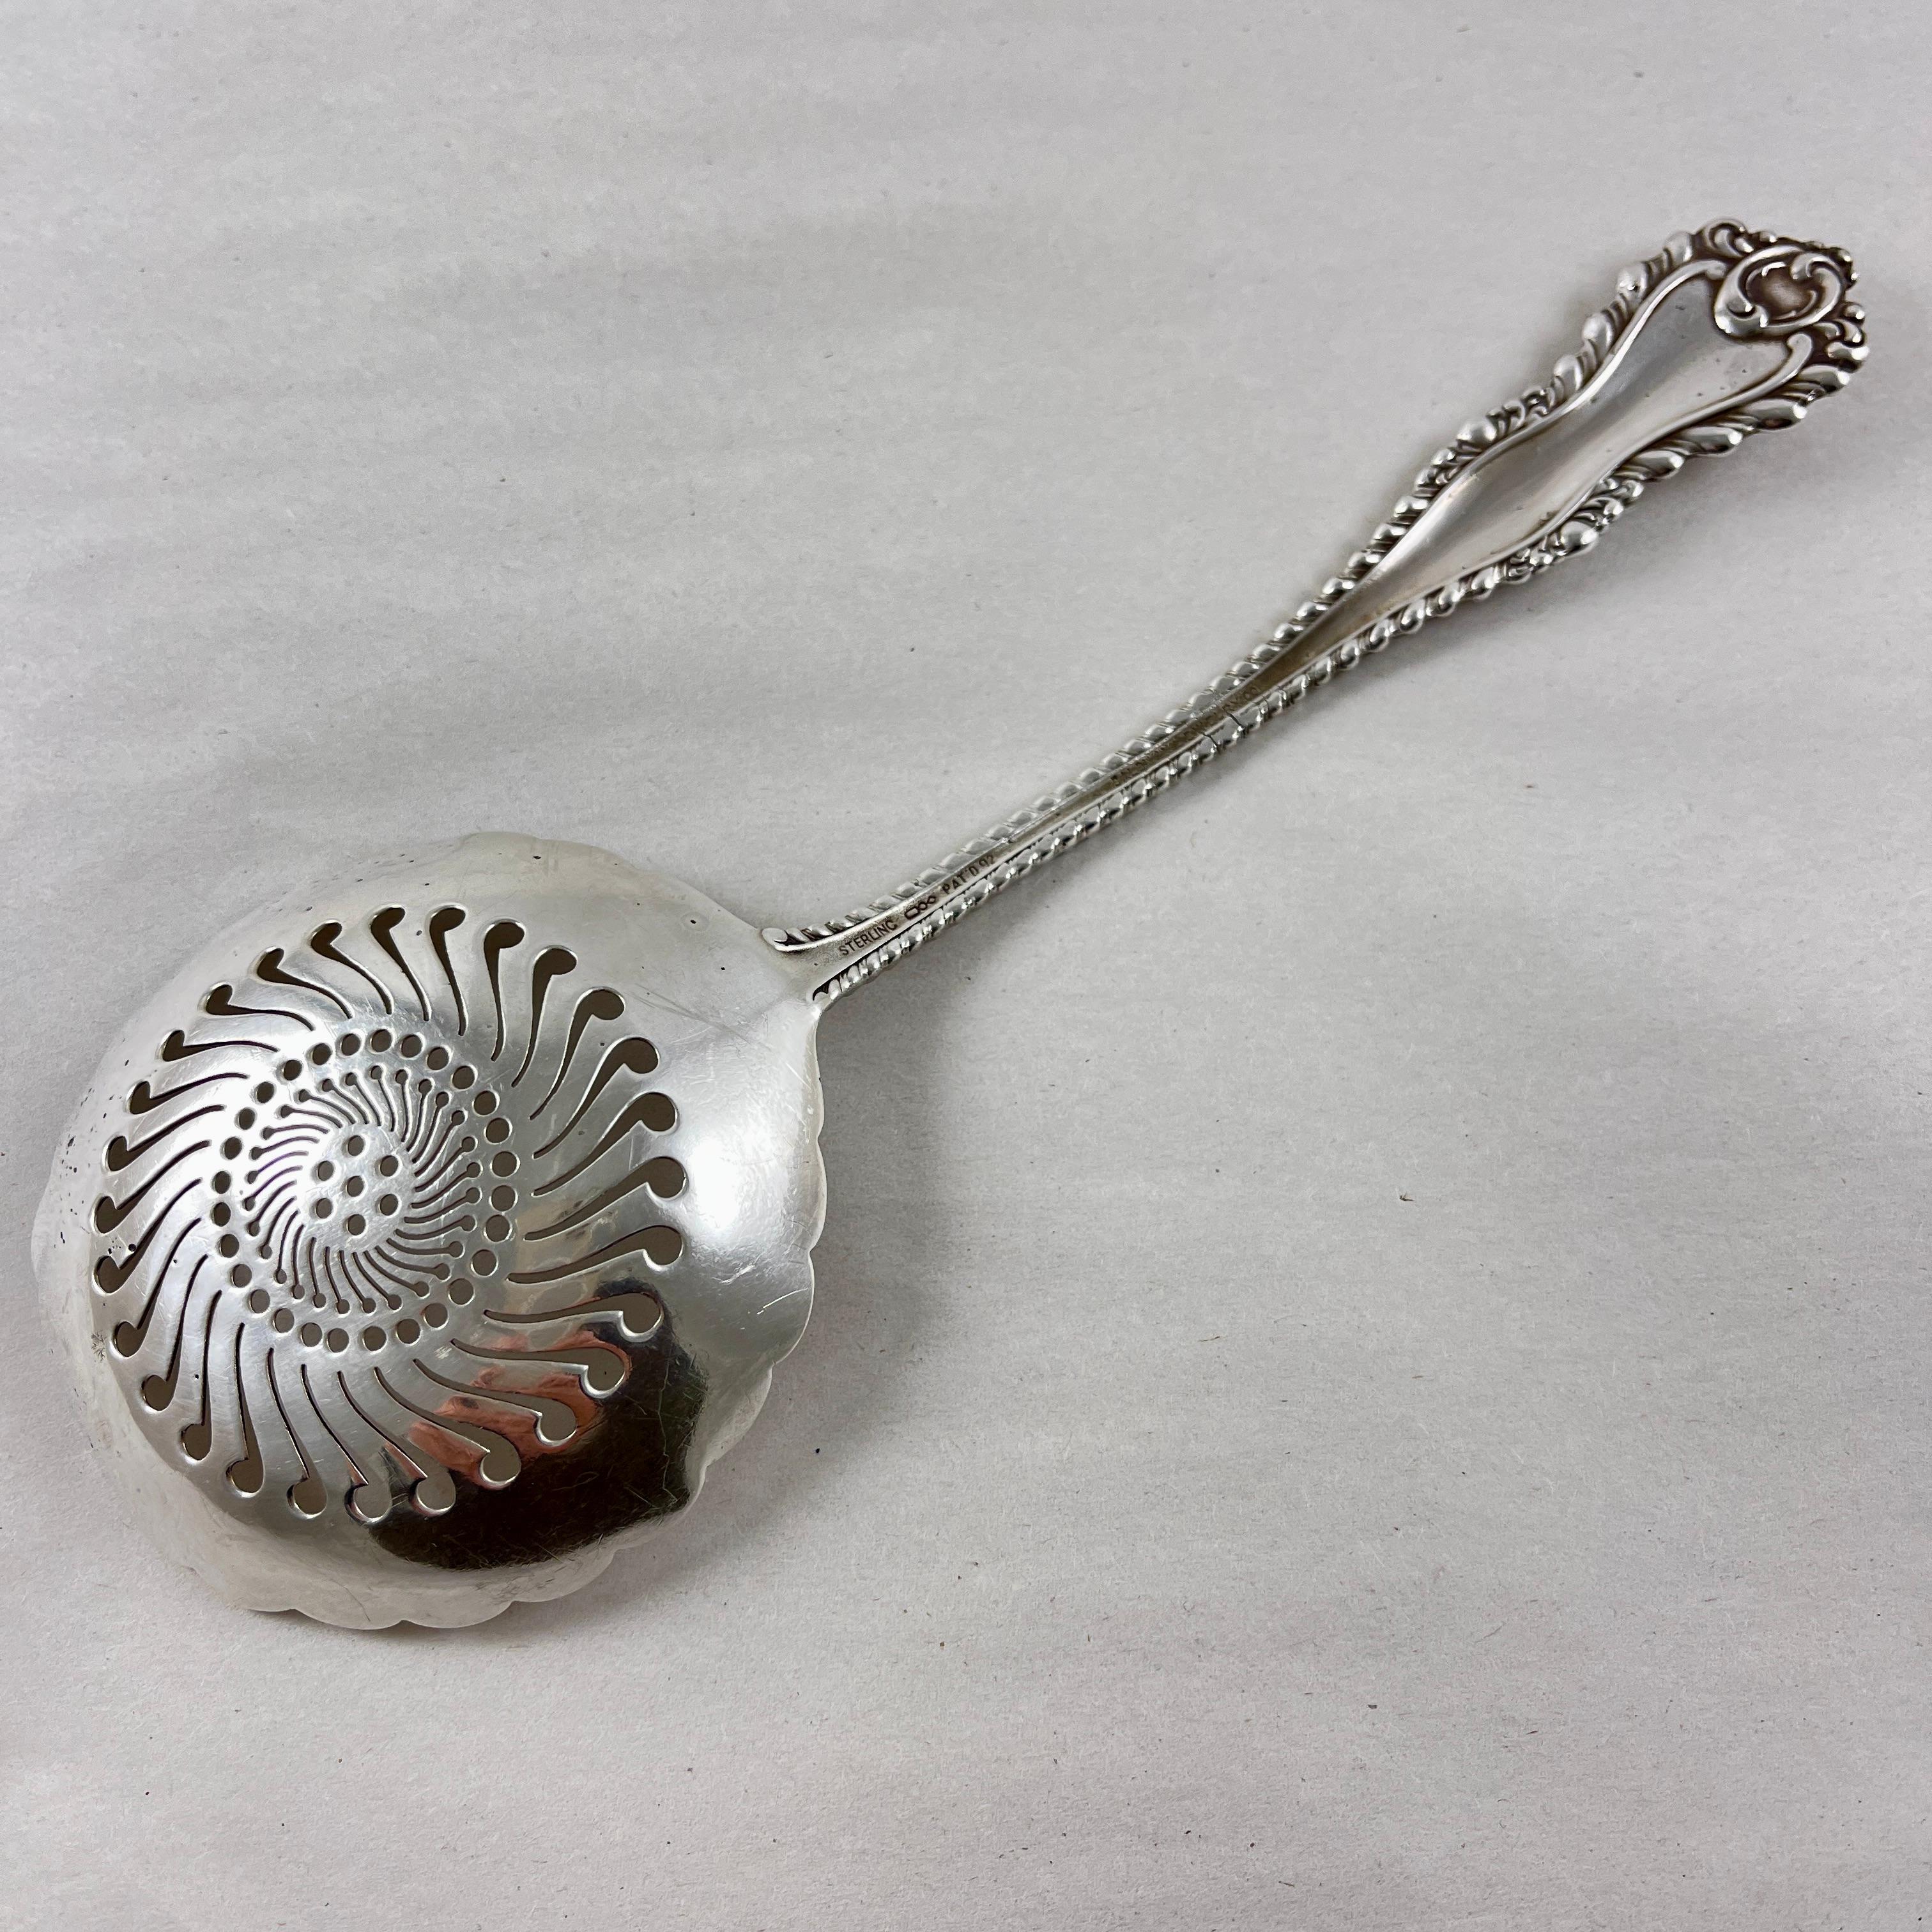 Dominick & Haff Estate Sterling Silver Hand Made Slotted Spoon, 1892 For Sale 1